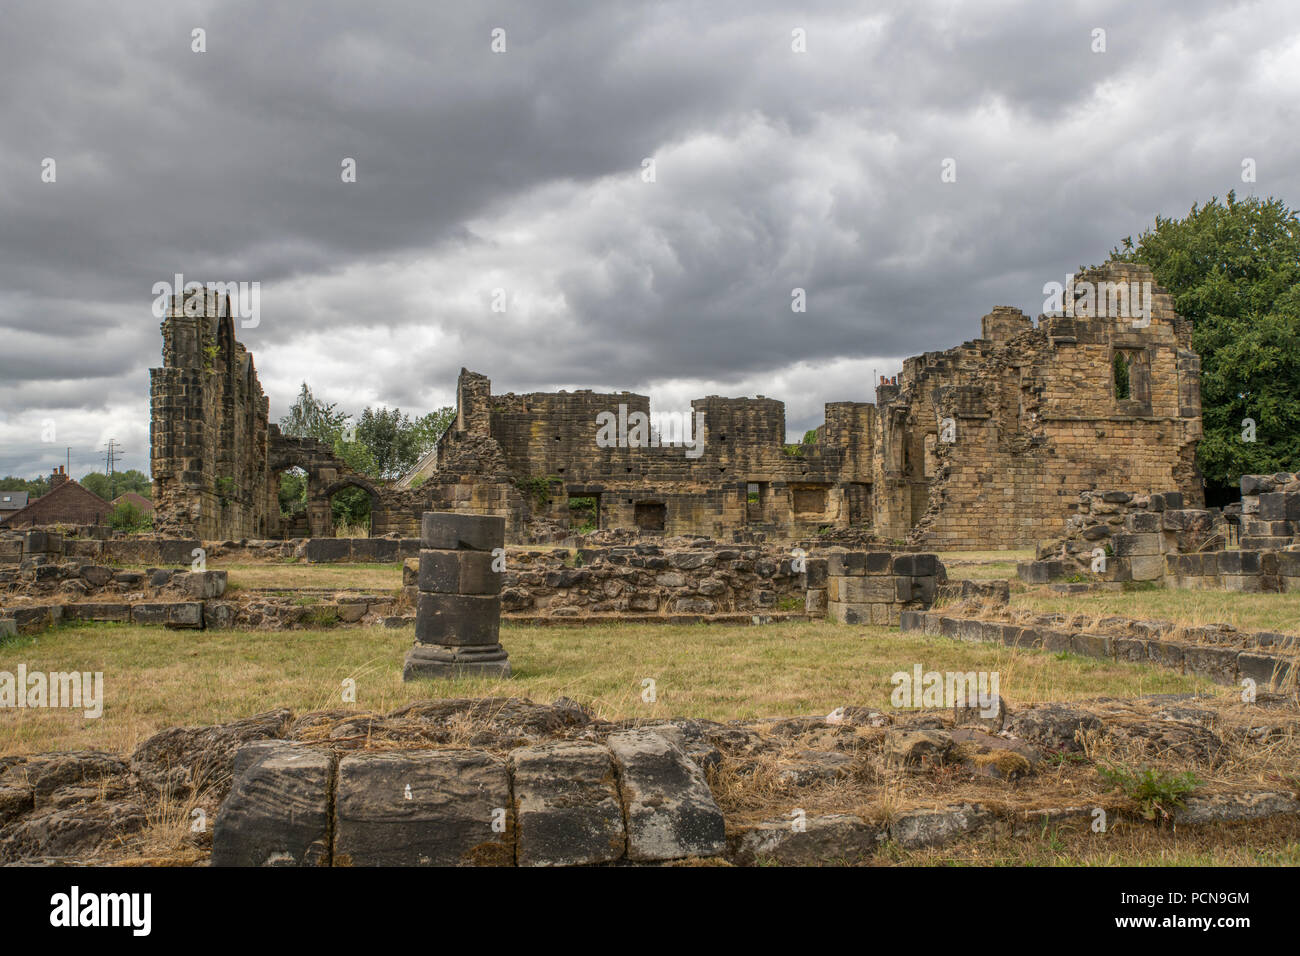 Monk Bretton Priory, Barnsley, South Yorkshire, Angleterre Banque D'Images